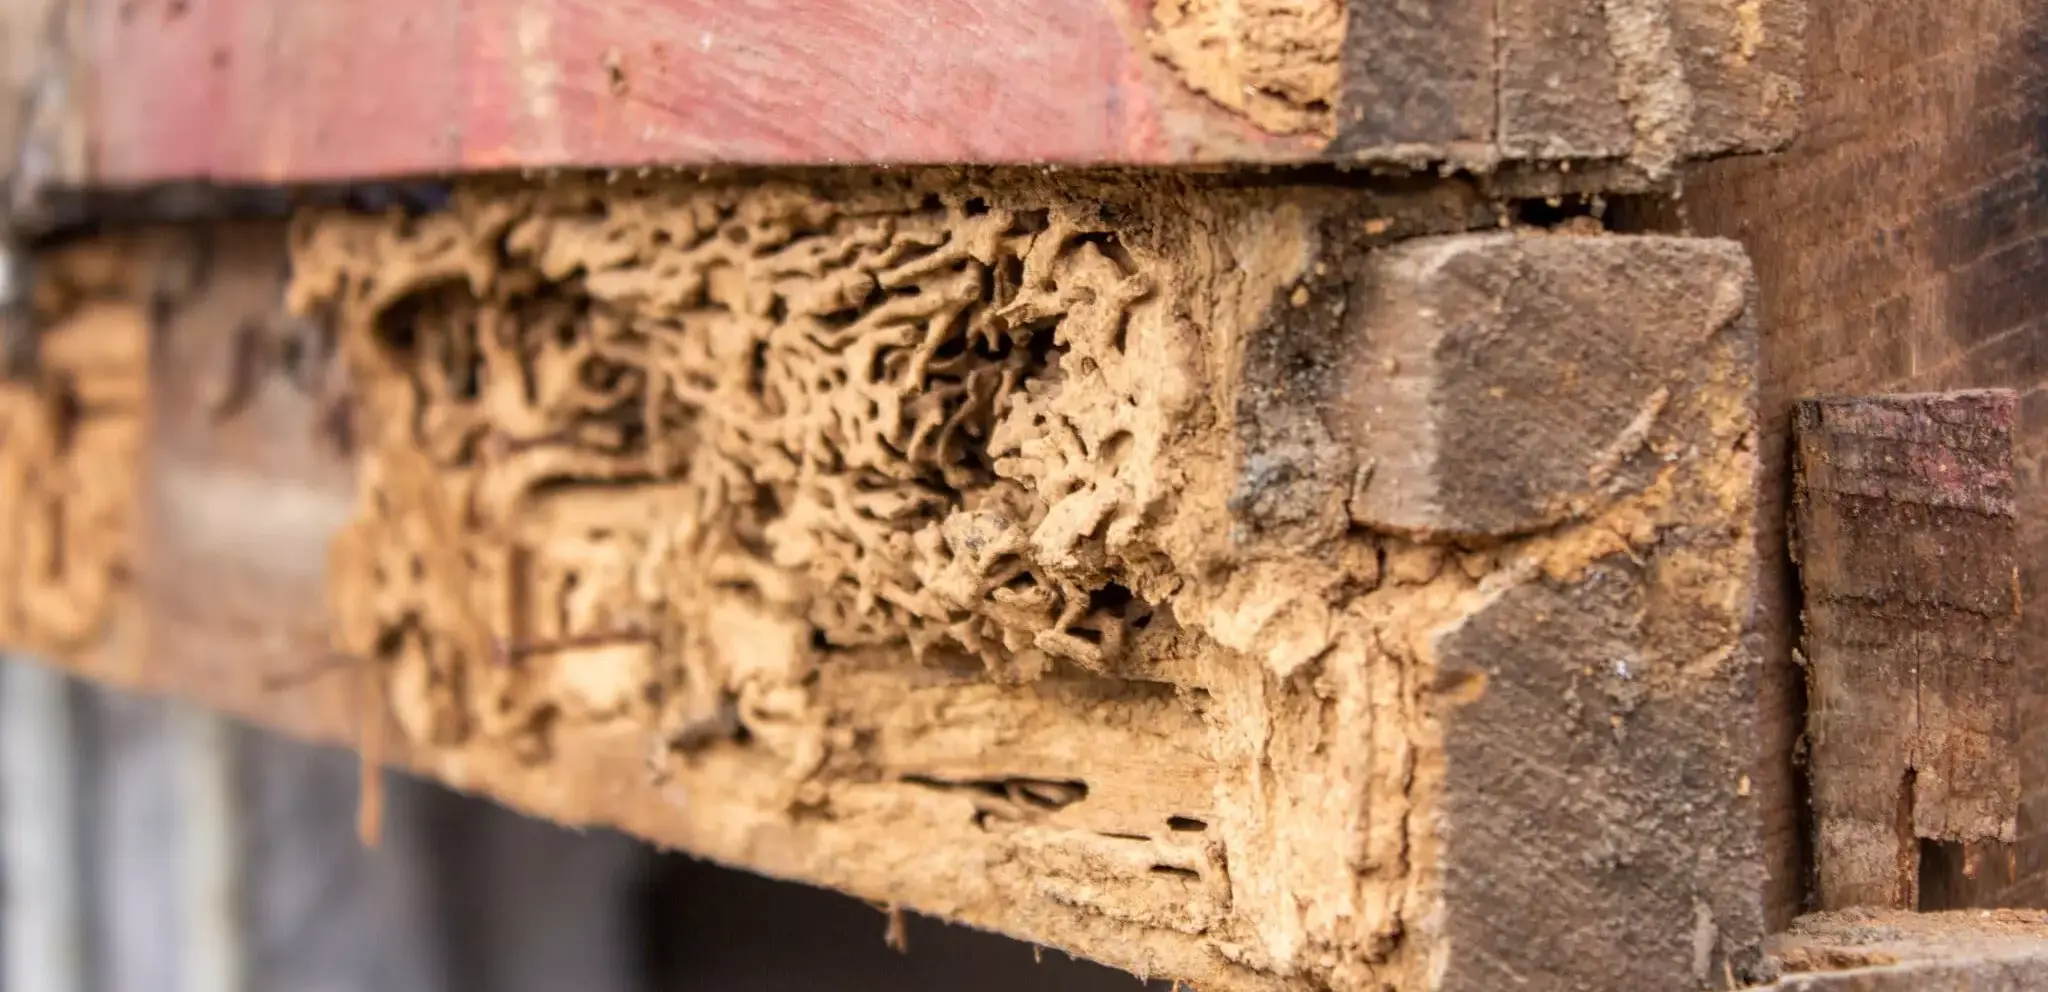 Termite control experts inspecting a home